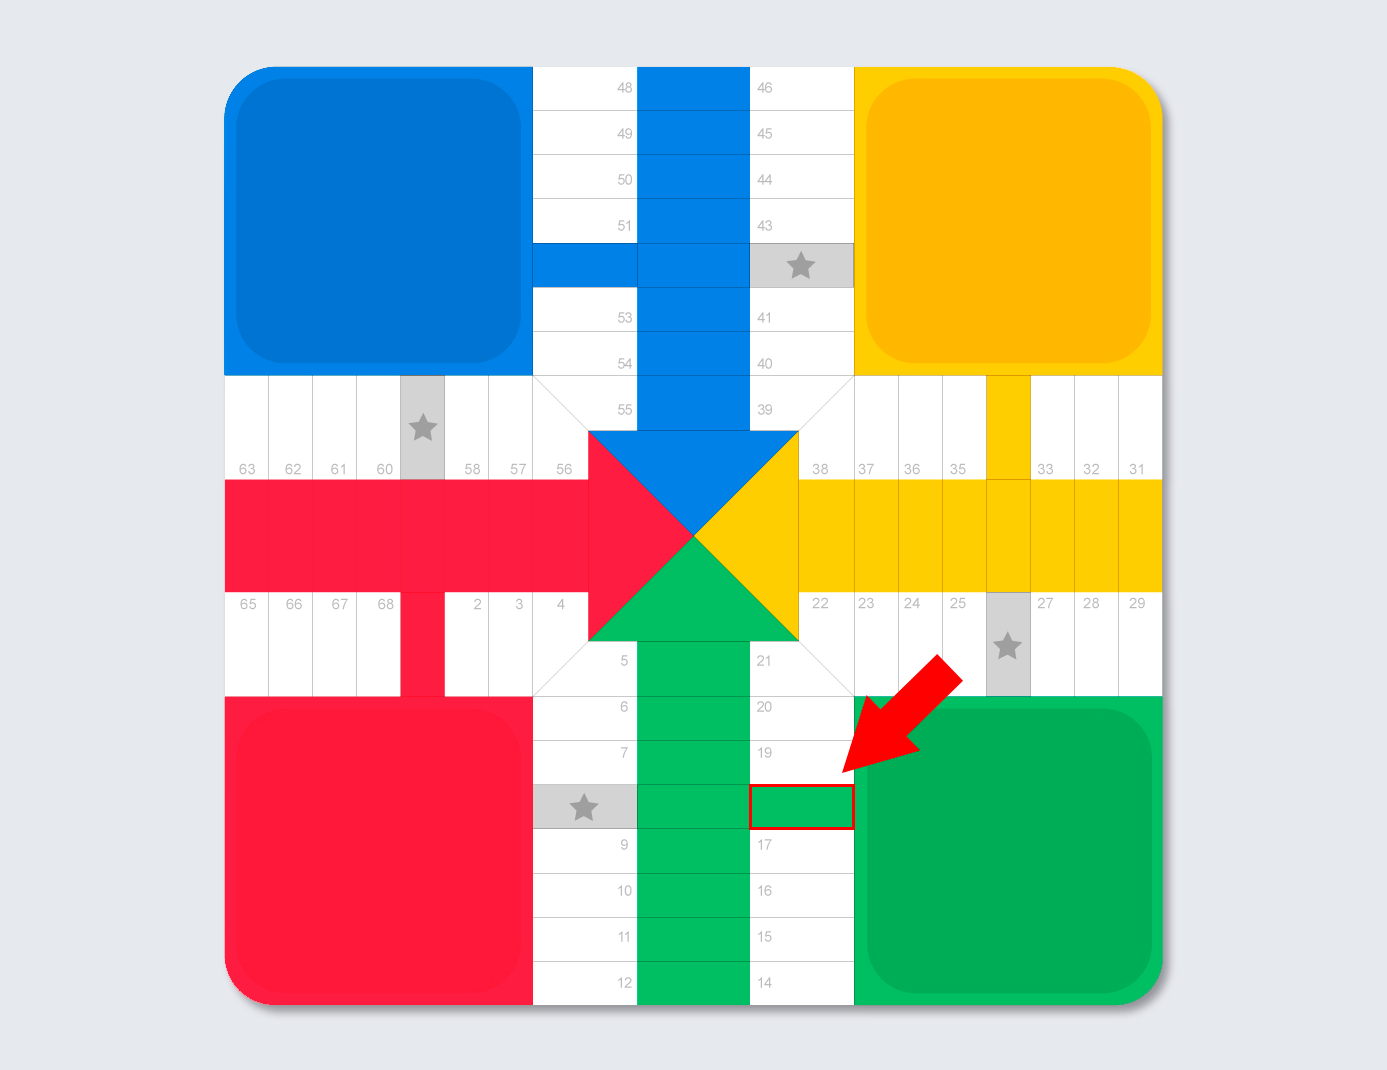 https://static2.fr9.es/contentnew/img/2012/tutorial/parchis/image11.png